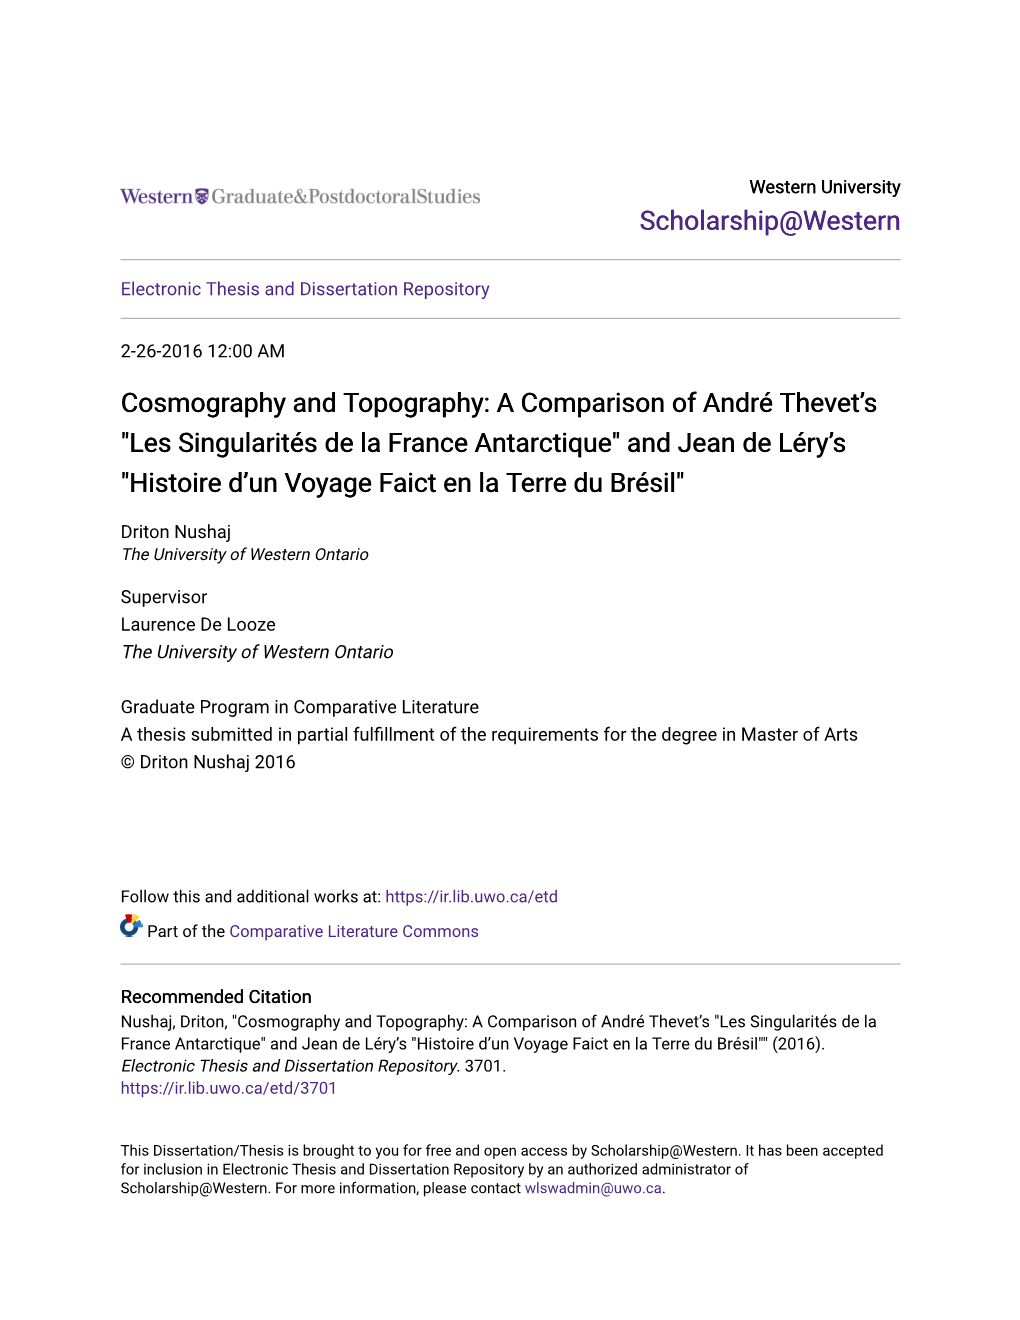 Cosmography and Topography: a Comparison of André Thevet's "Les